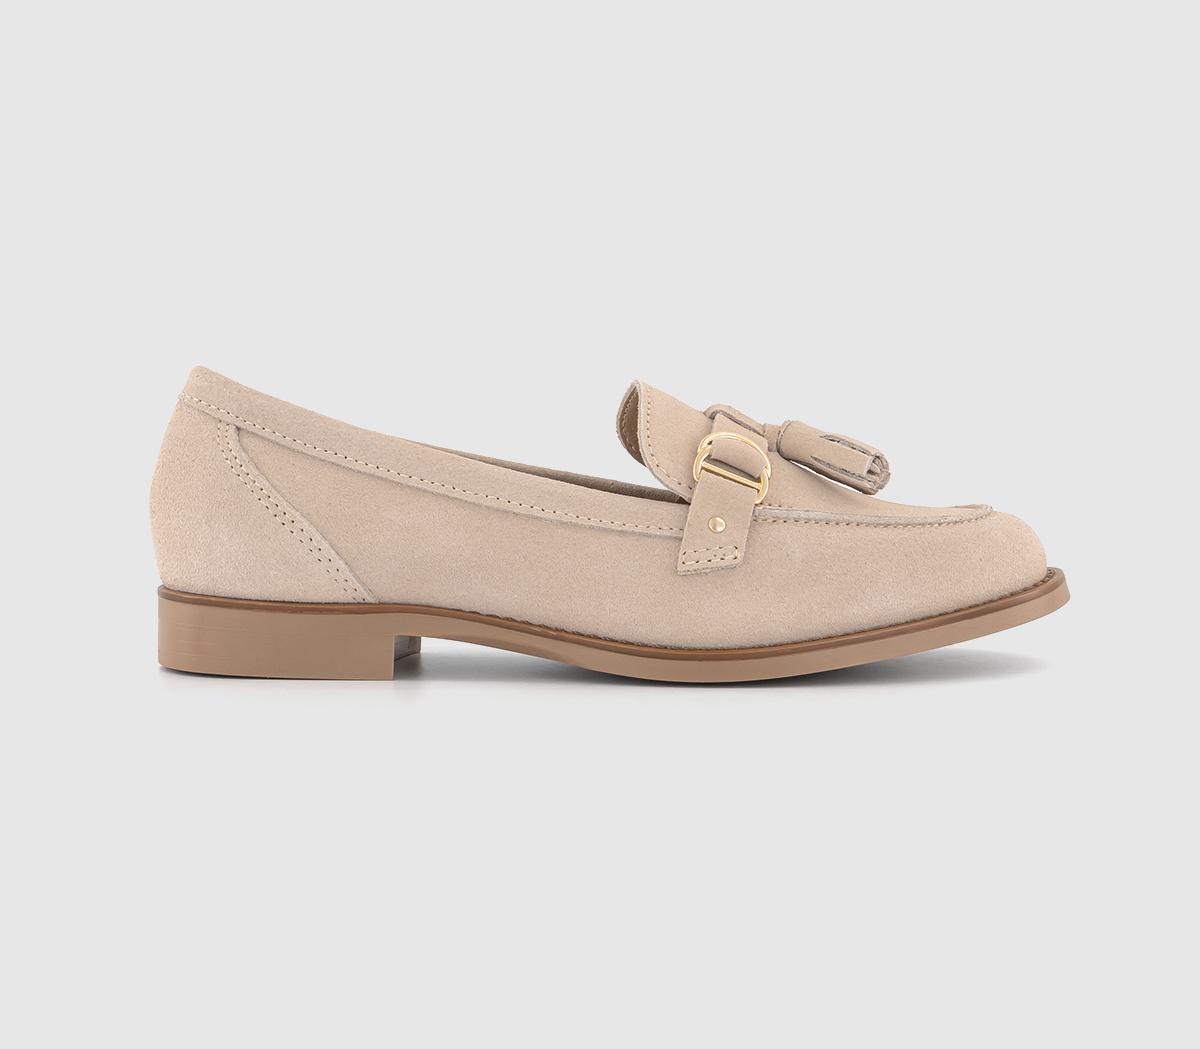 OFFICEFeels Leather Trim Tassel LoafersBlush Suede